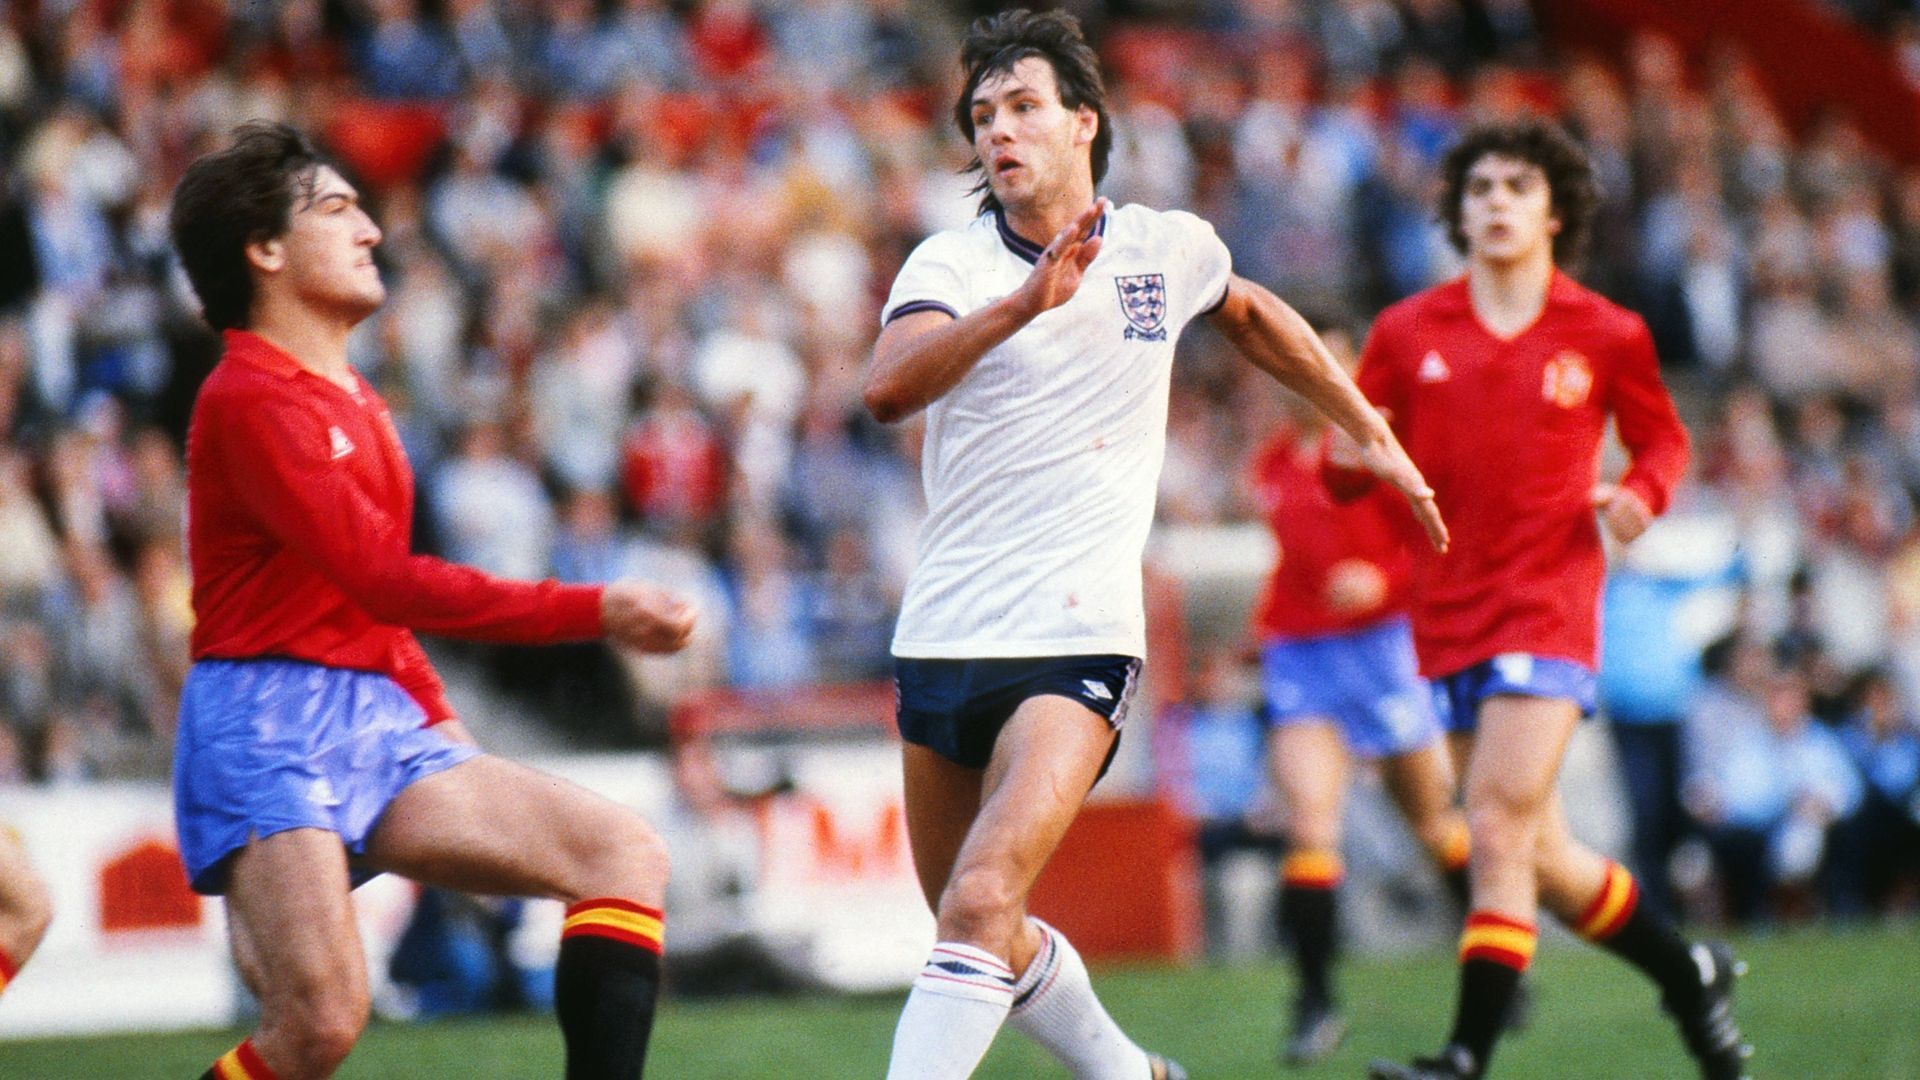 
                <strong>1984 - Mark Hateley (England)</strong><br>
                &#x2022; <strong>Anzahl der A-Länderspiele:</strong> 32<br>&#x2022; <strong>spätere Erfolge: </strong>Französischer Meister 1988 mit AS Monaco<br>
              